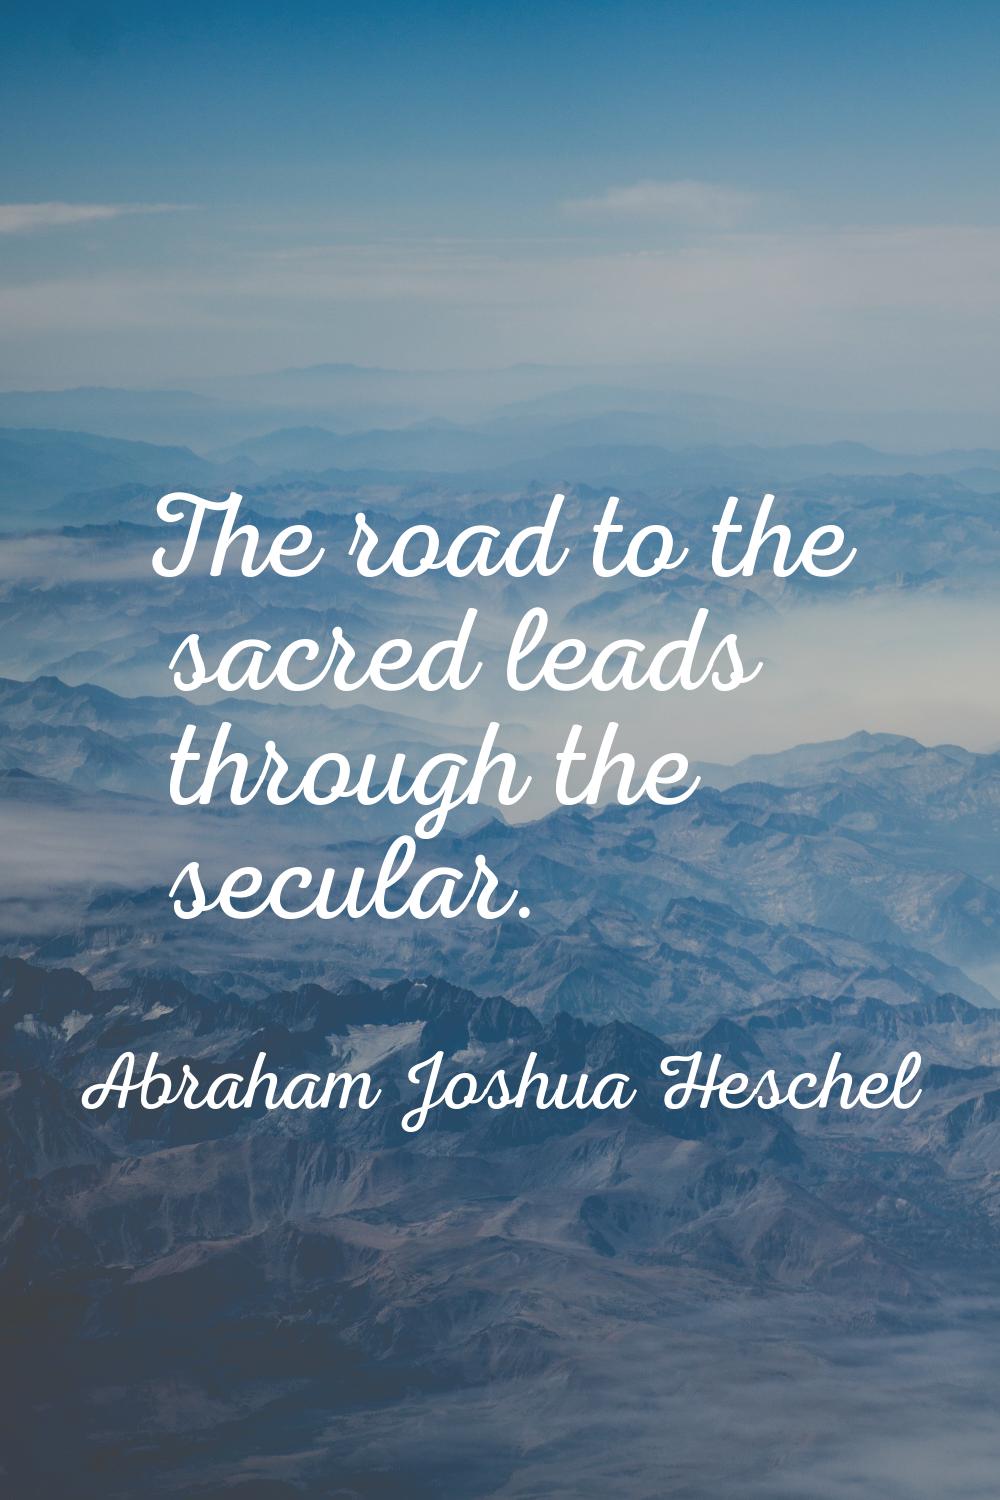 The road to the sacred leads through the secular.